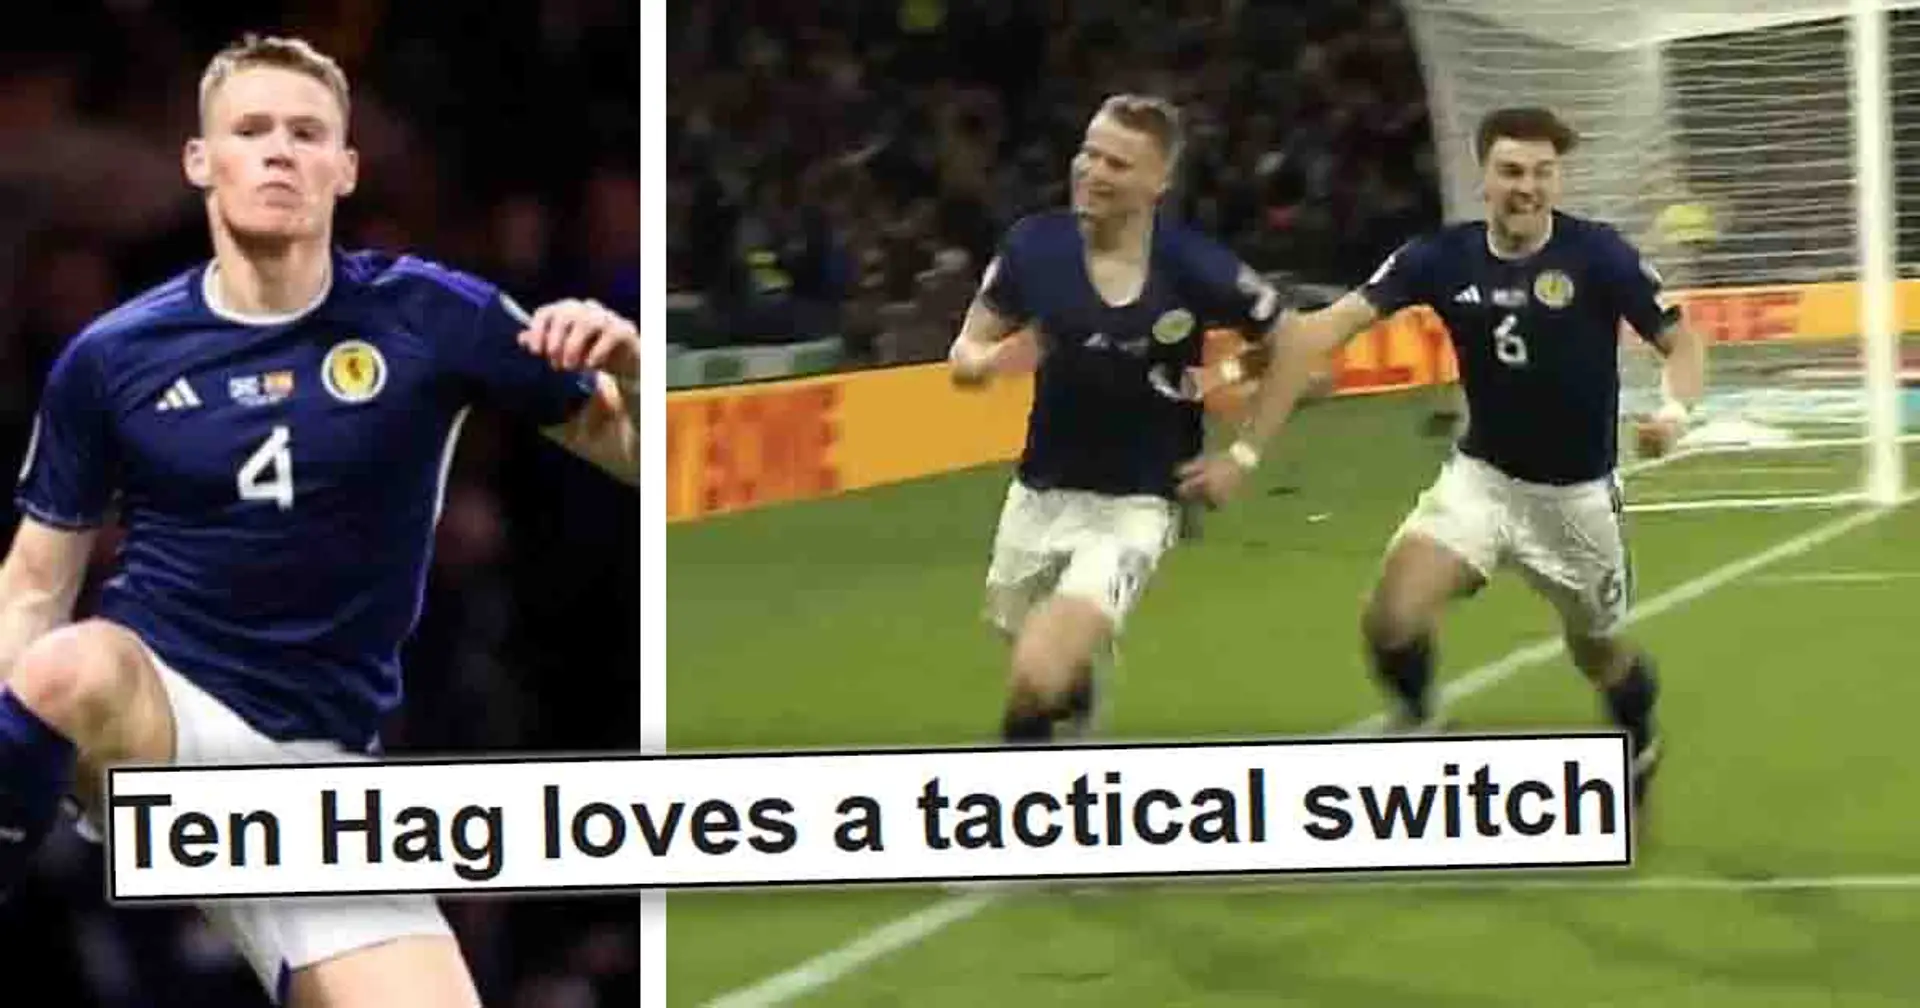 'Our new striker': United fans send advice to Ten Hag as McTominay scores brace in Scotland’s win over Spain